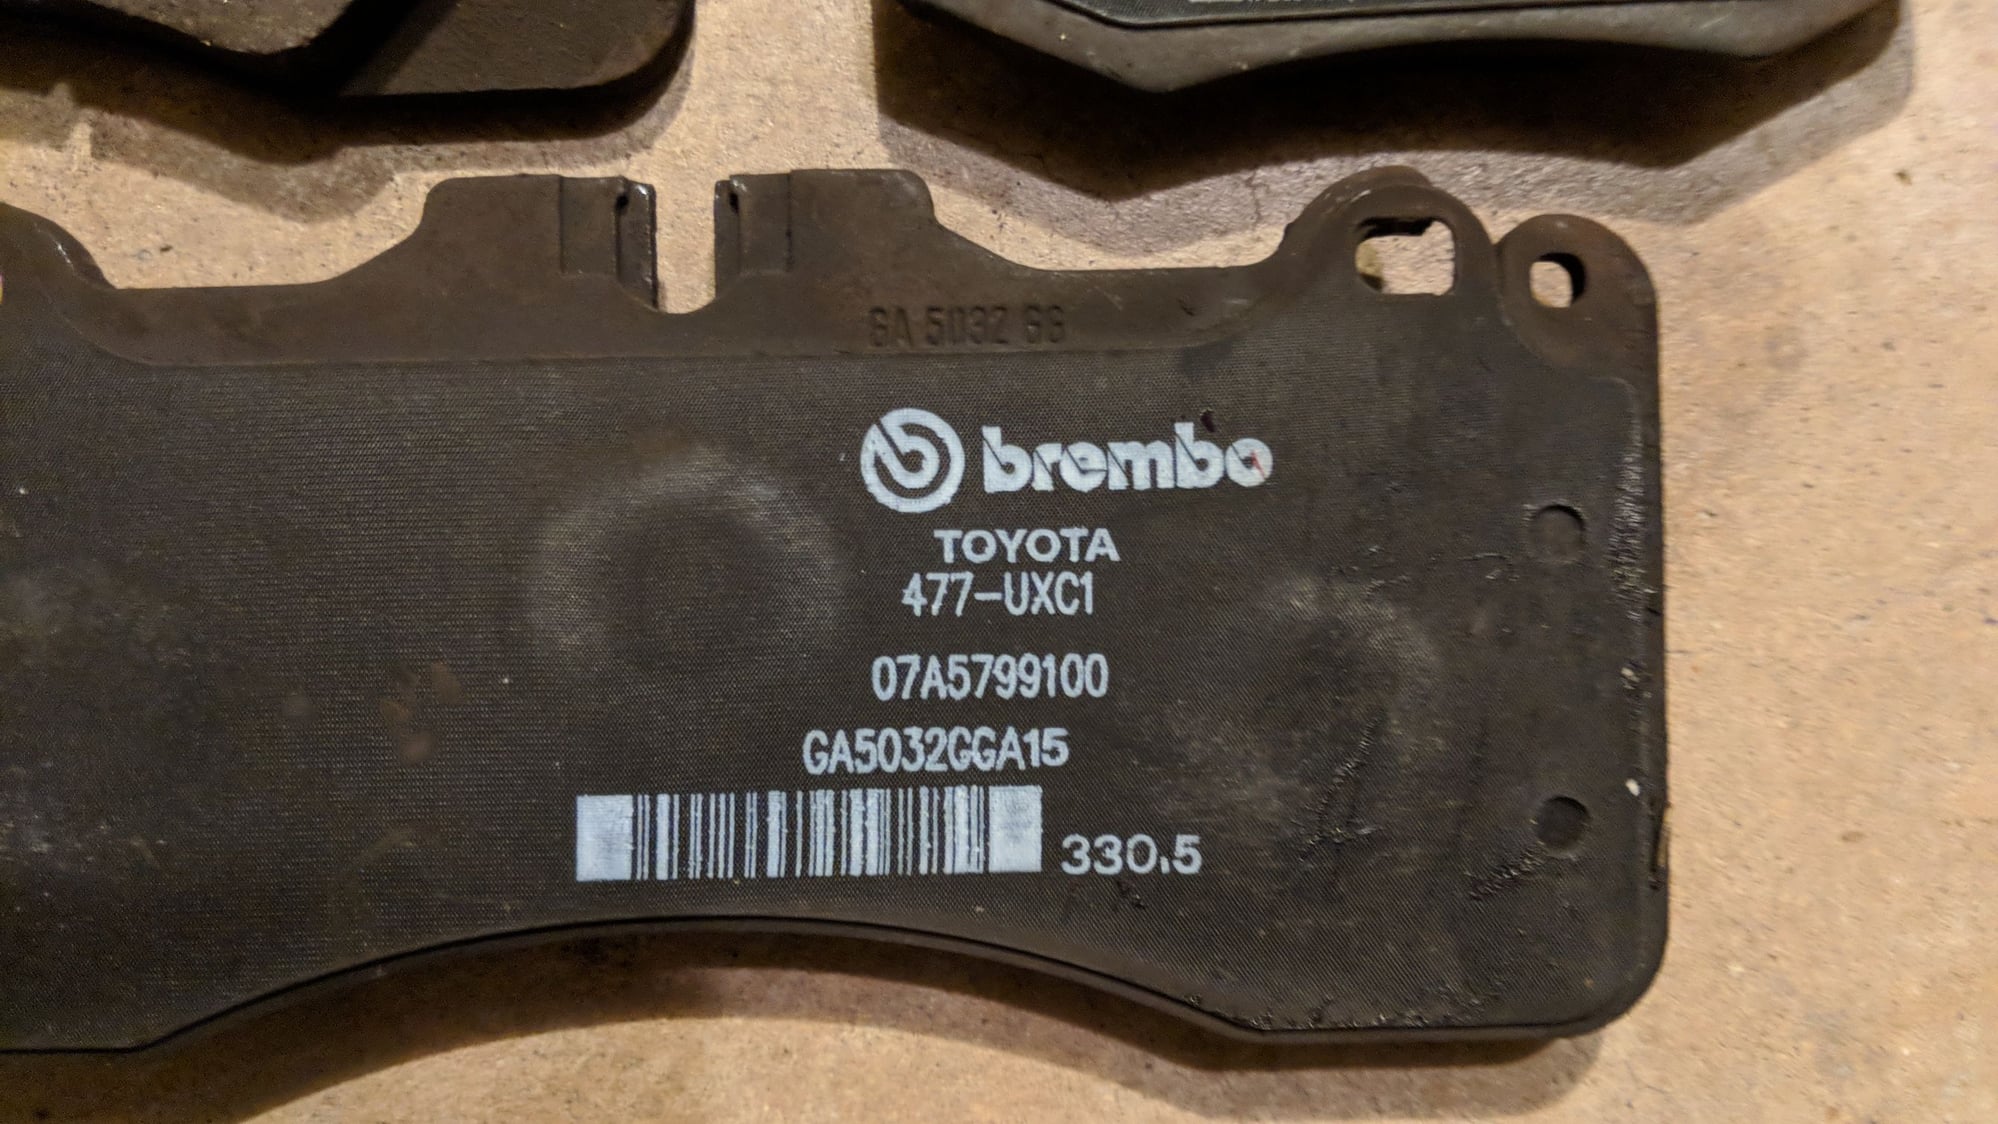 Brakes - FS: as-new, take-off OEM Brembro pads - Used - 2016 to 2019 Lexus GS F - Na, TX 79999, United States